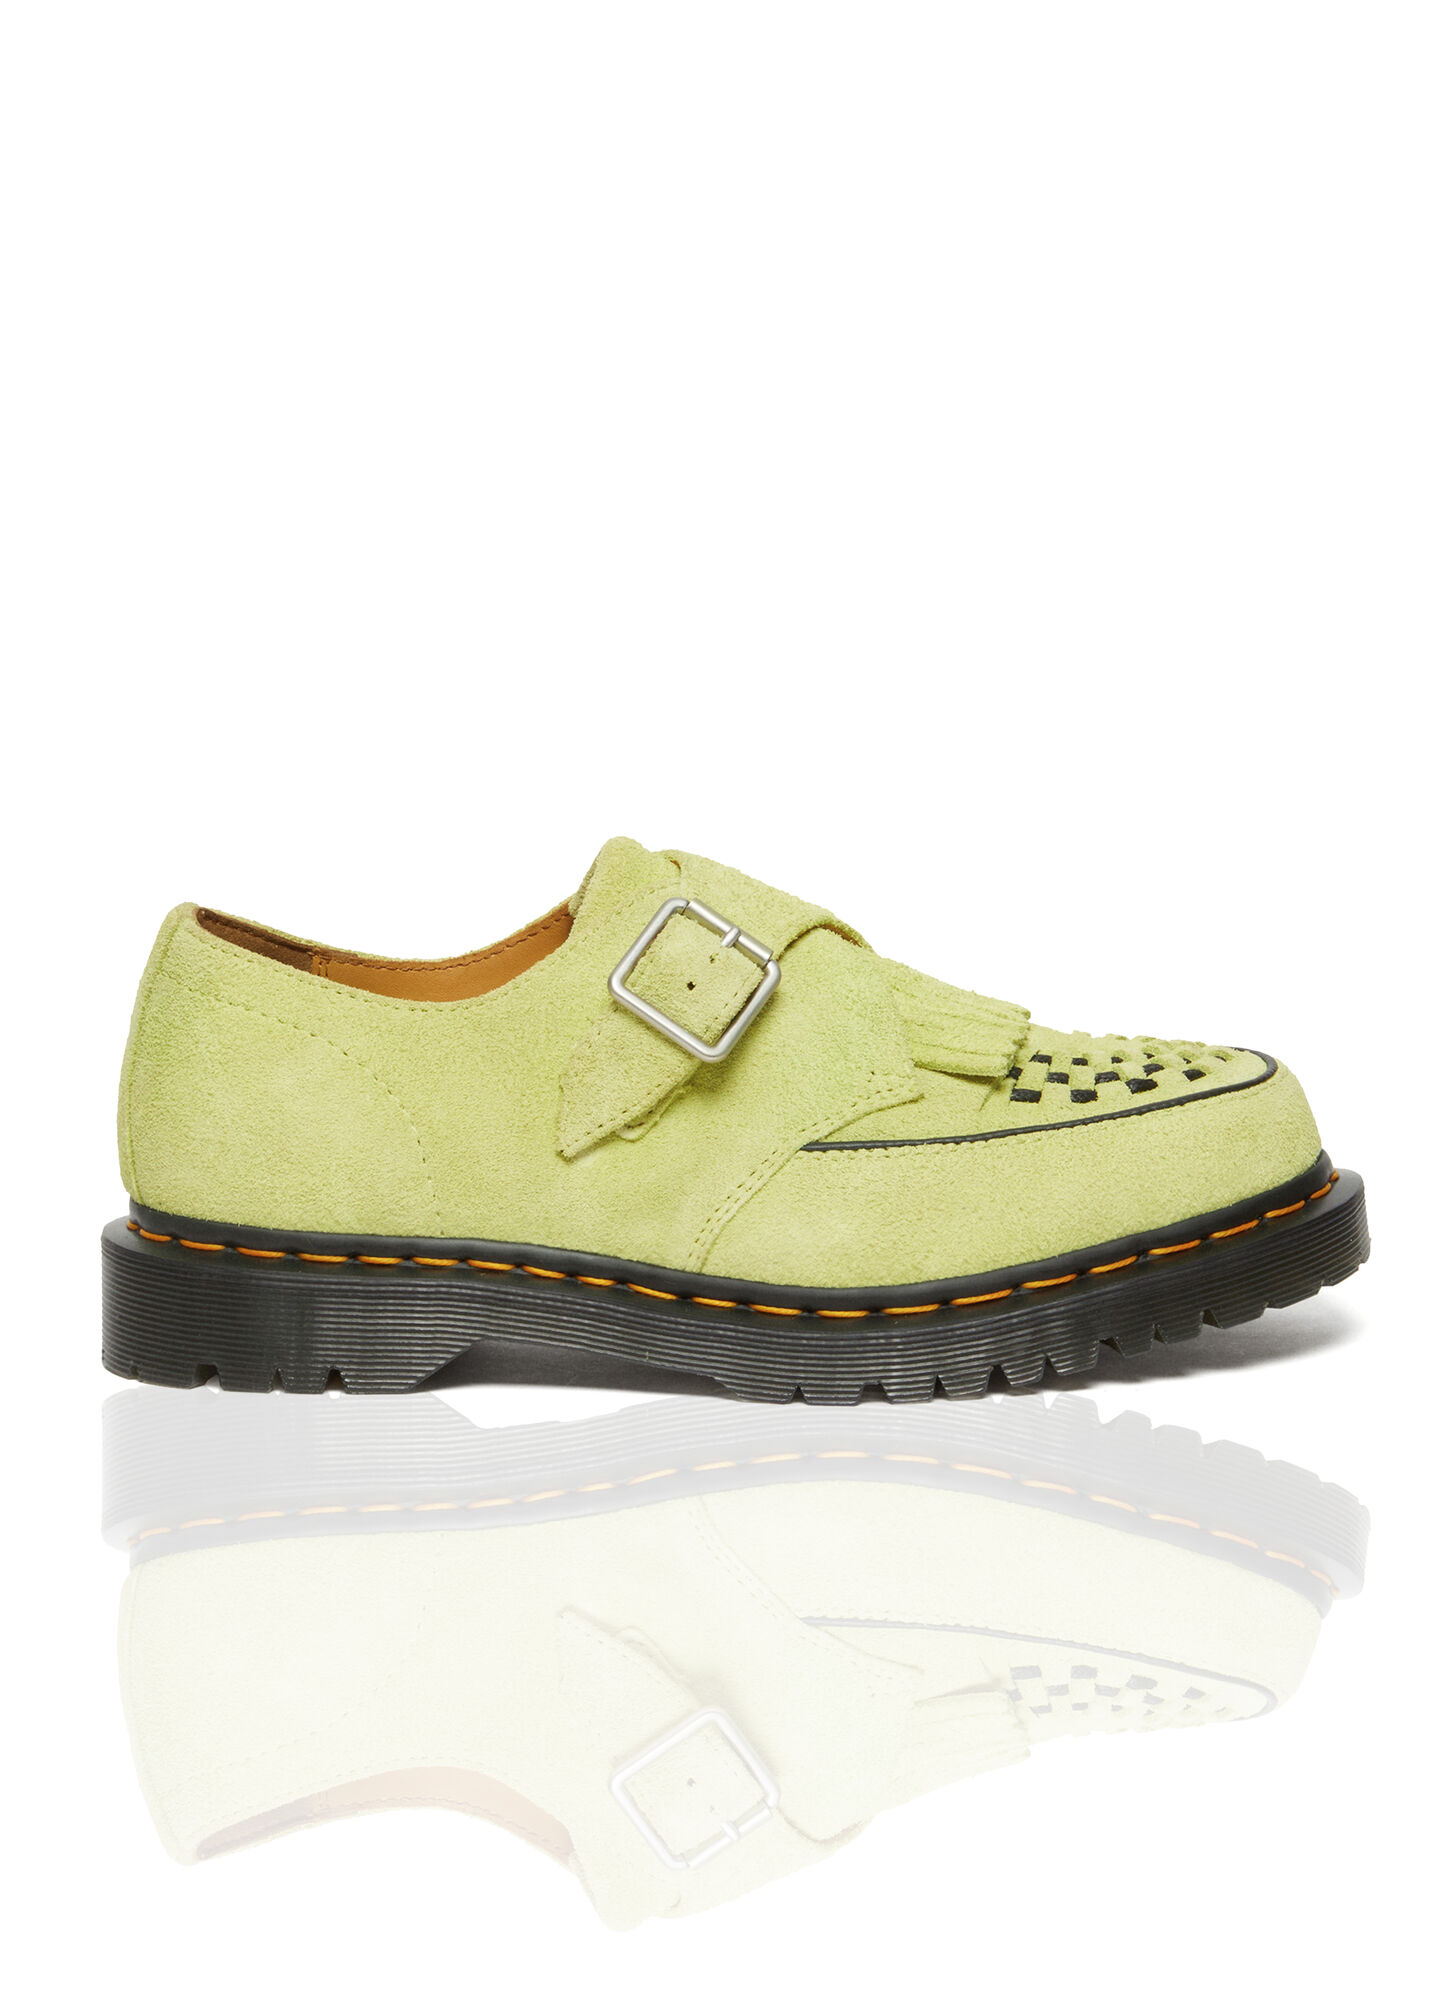 Dr. Martens - Man Loafers Uk - 09 In Green